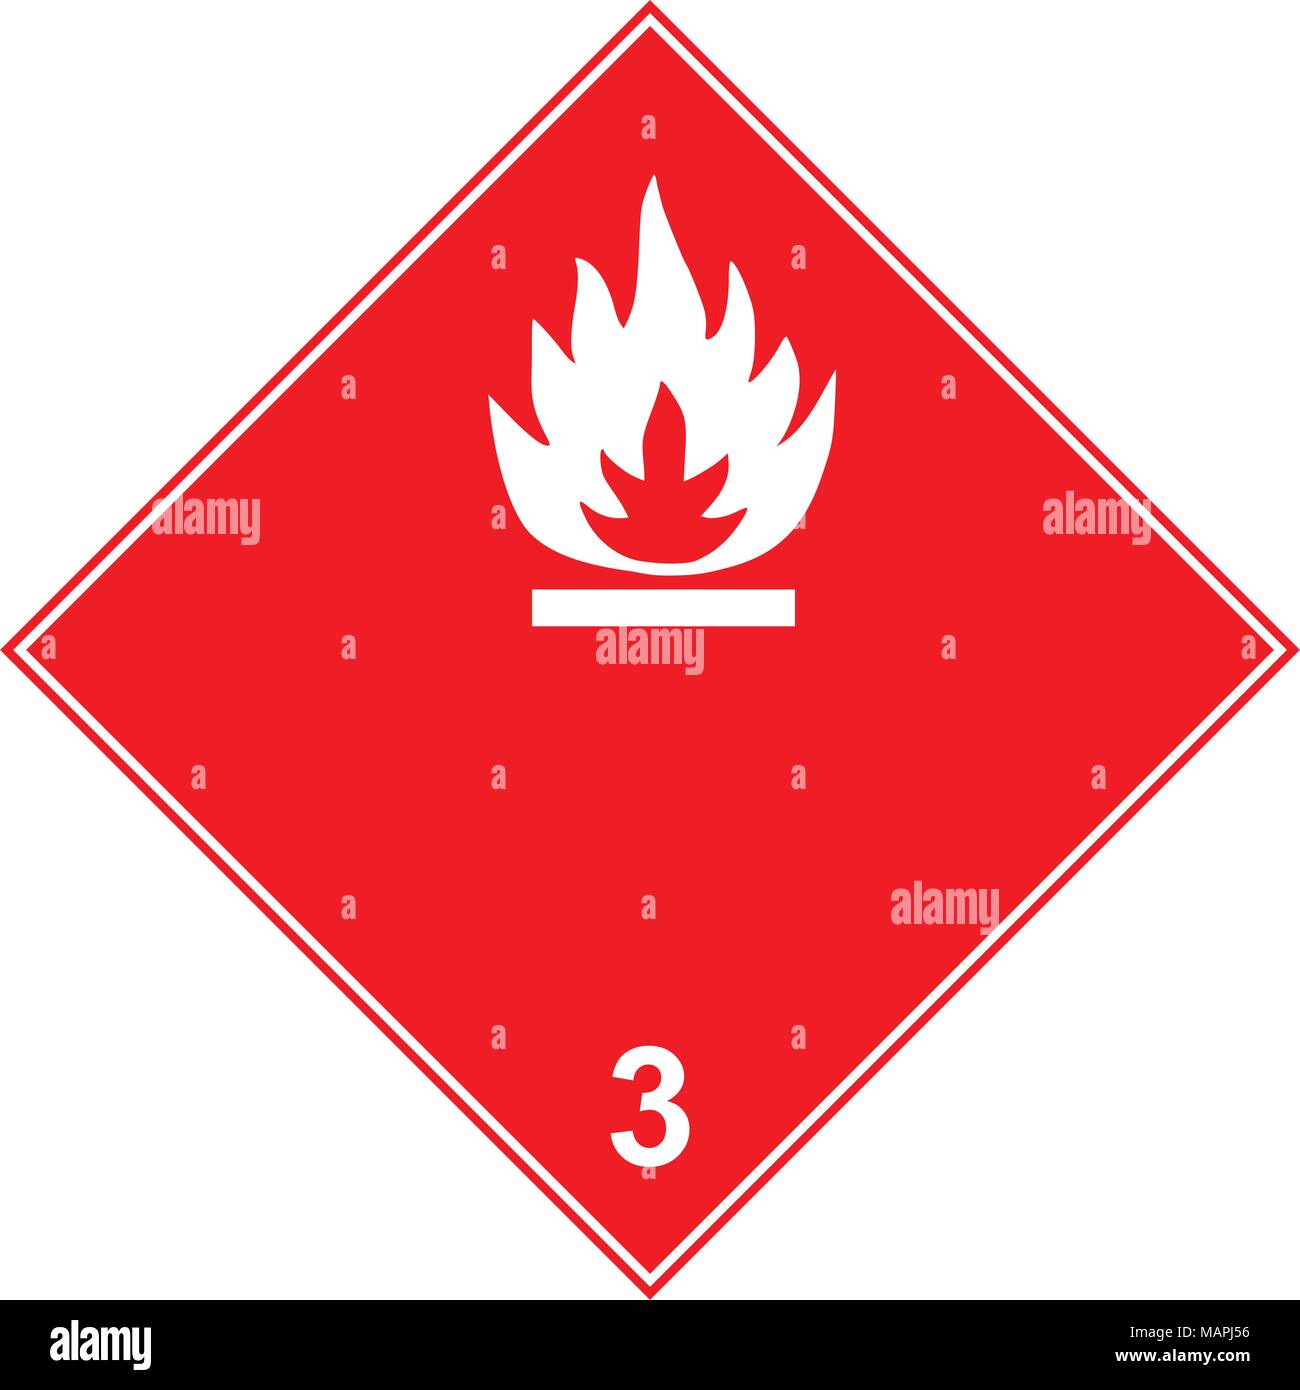 Dangerous - class 3 flammable goods transported warning sign. White flame icon in red diamond Stock Vector